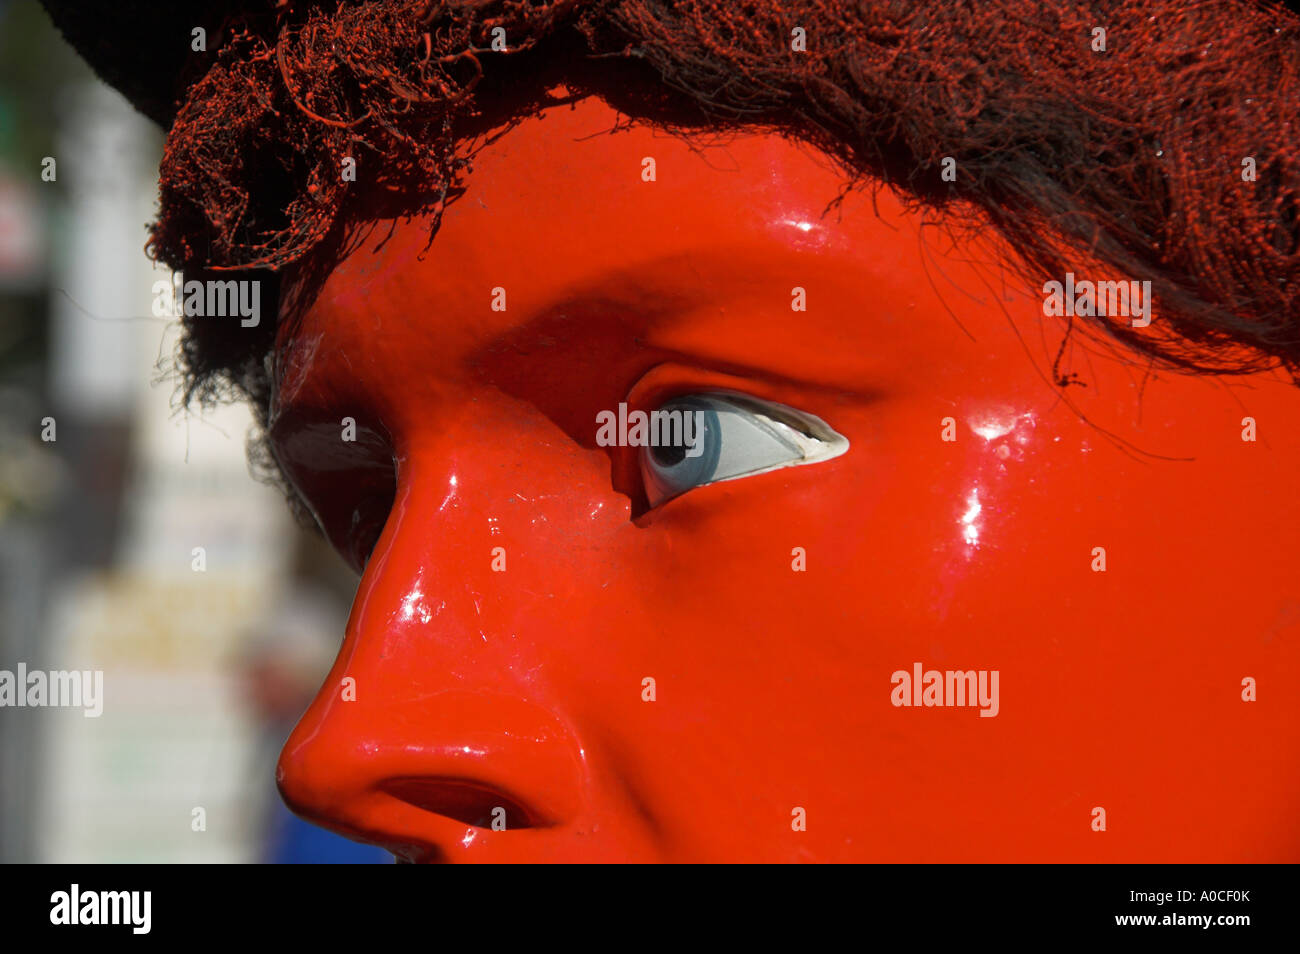 Europe Germany red face mannequin Stock Photo